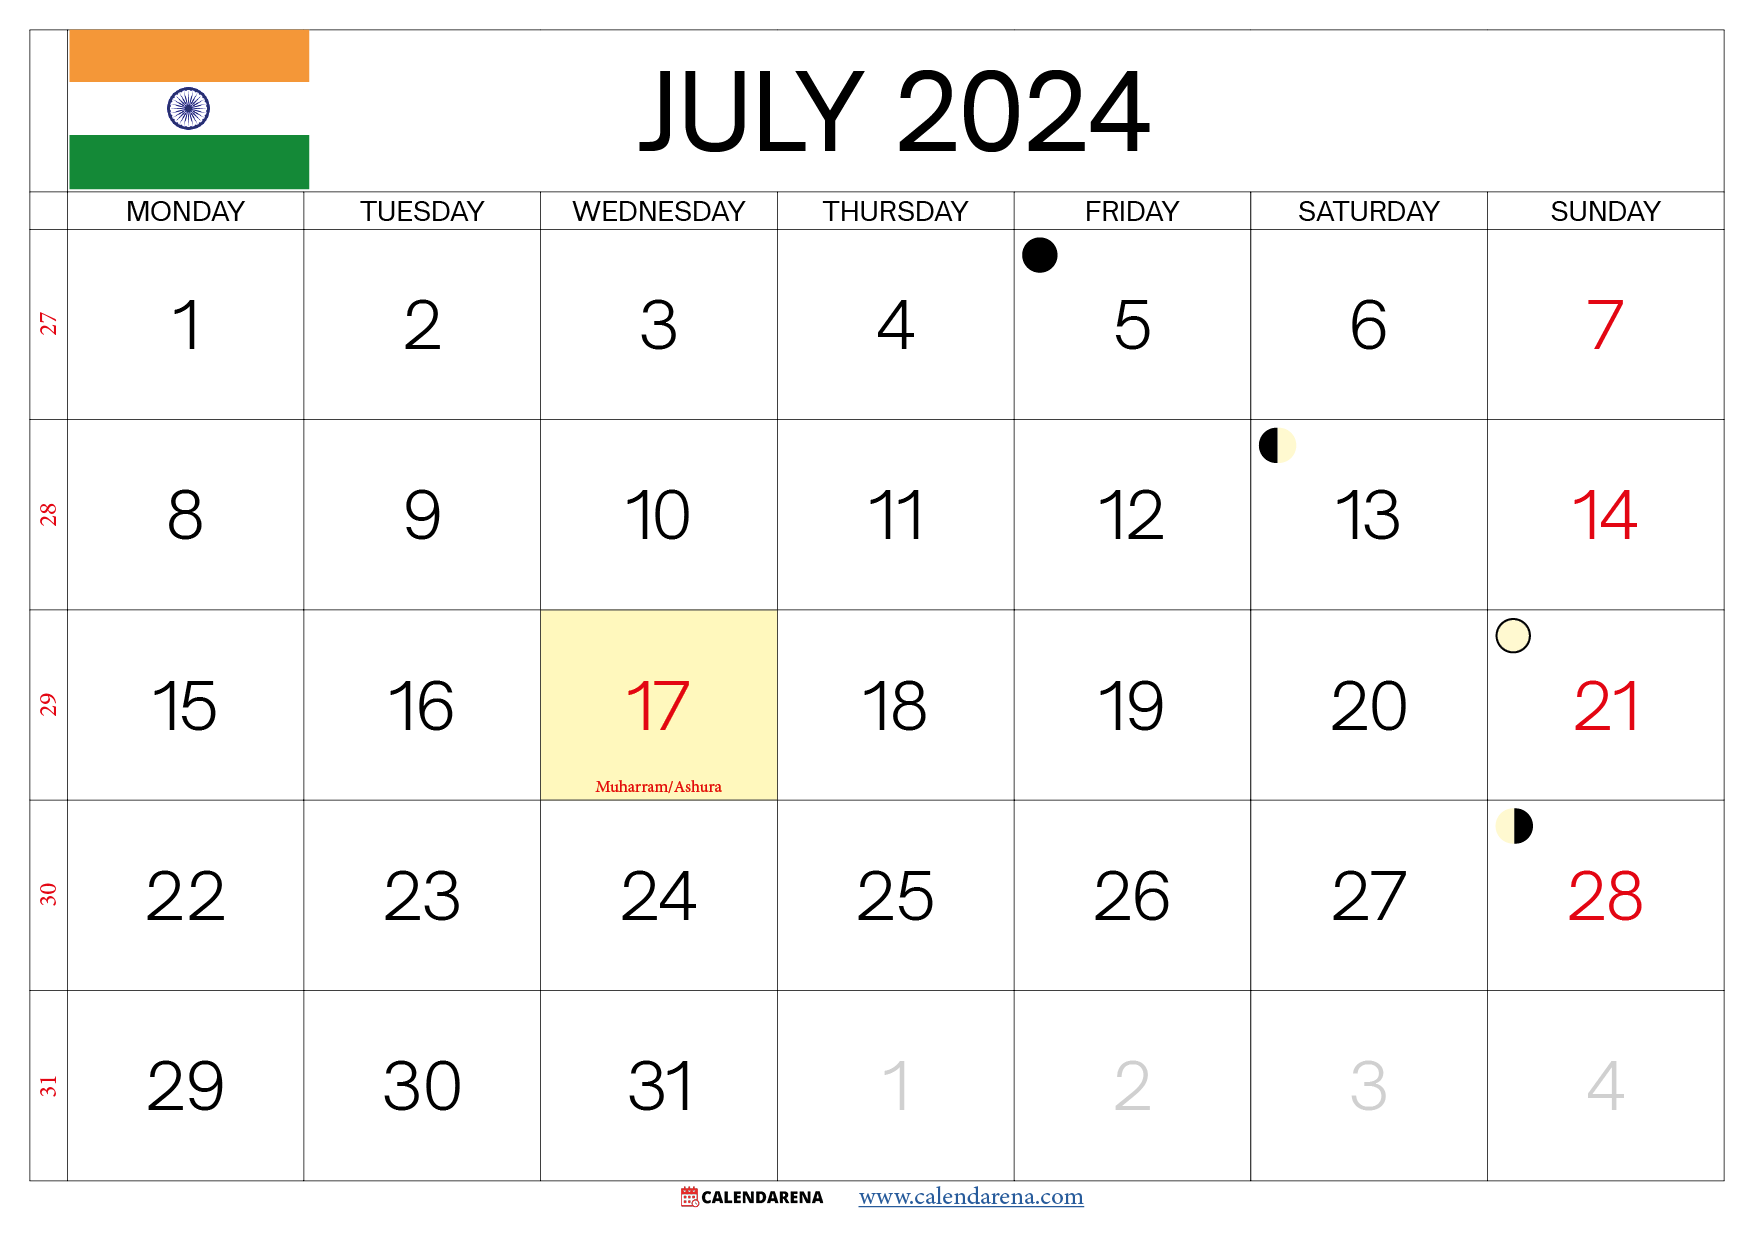 July 2024 Calendar India With Holidays pertaining to July 2024 Calendar With Holidays India